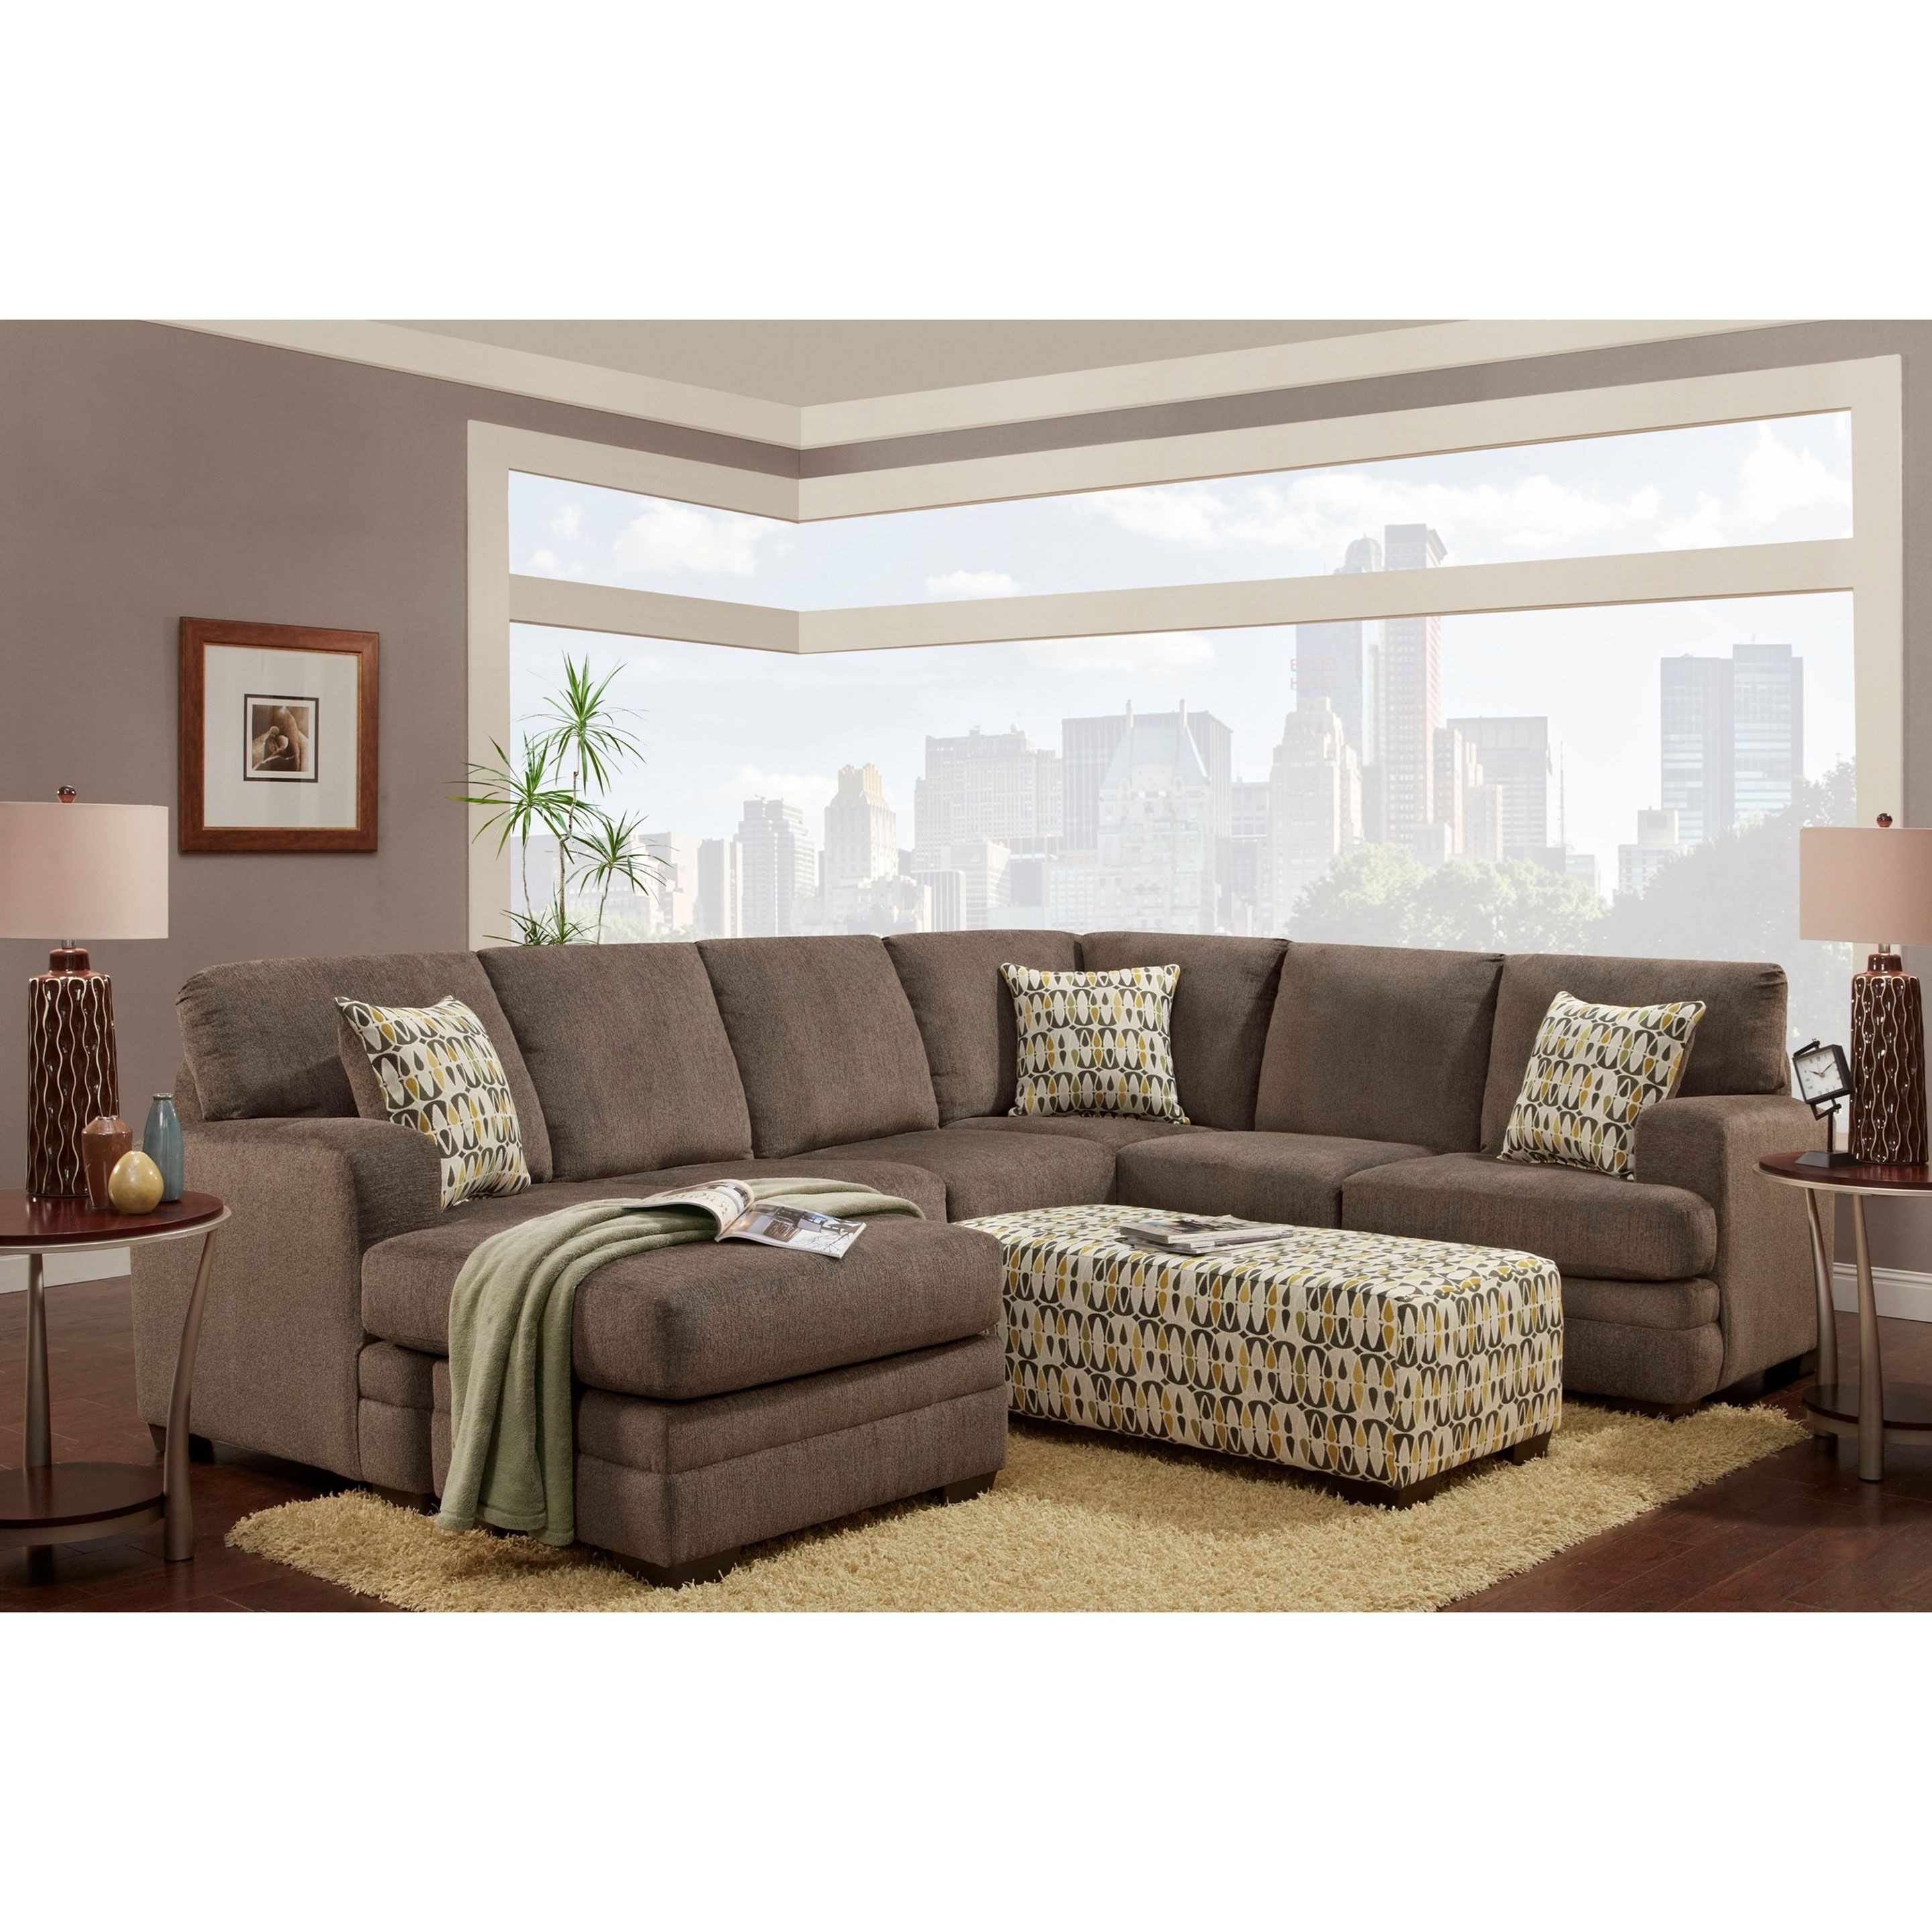 Sectional Sofa. Best Seller Sectional Sofas Phoenix: Sectional Sofas Throughout Phoenix Sectional Sofas (Photo 1 of 10)